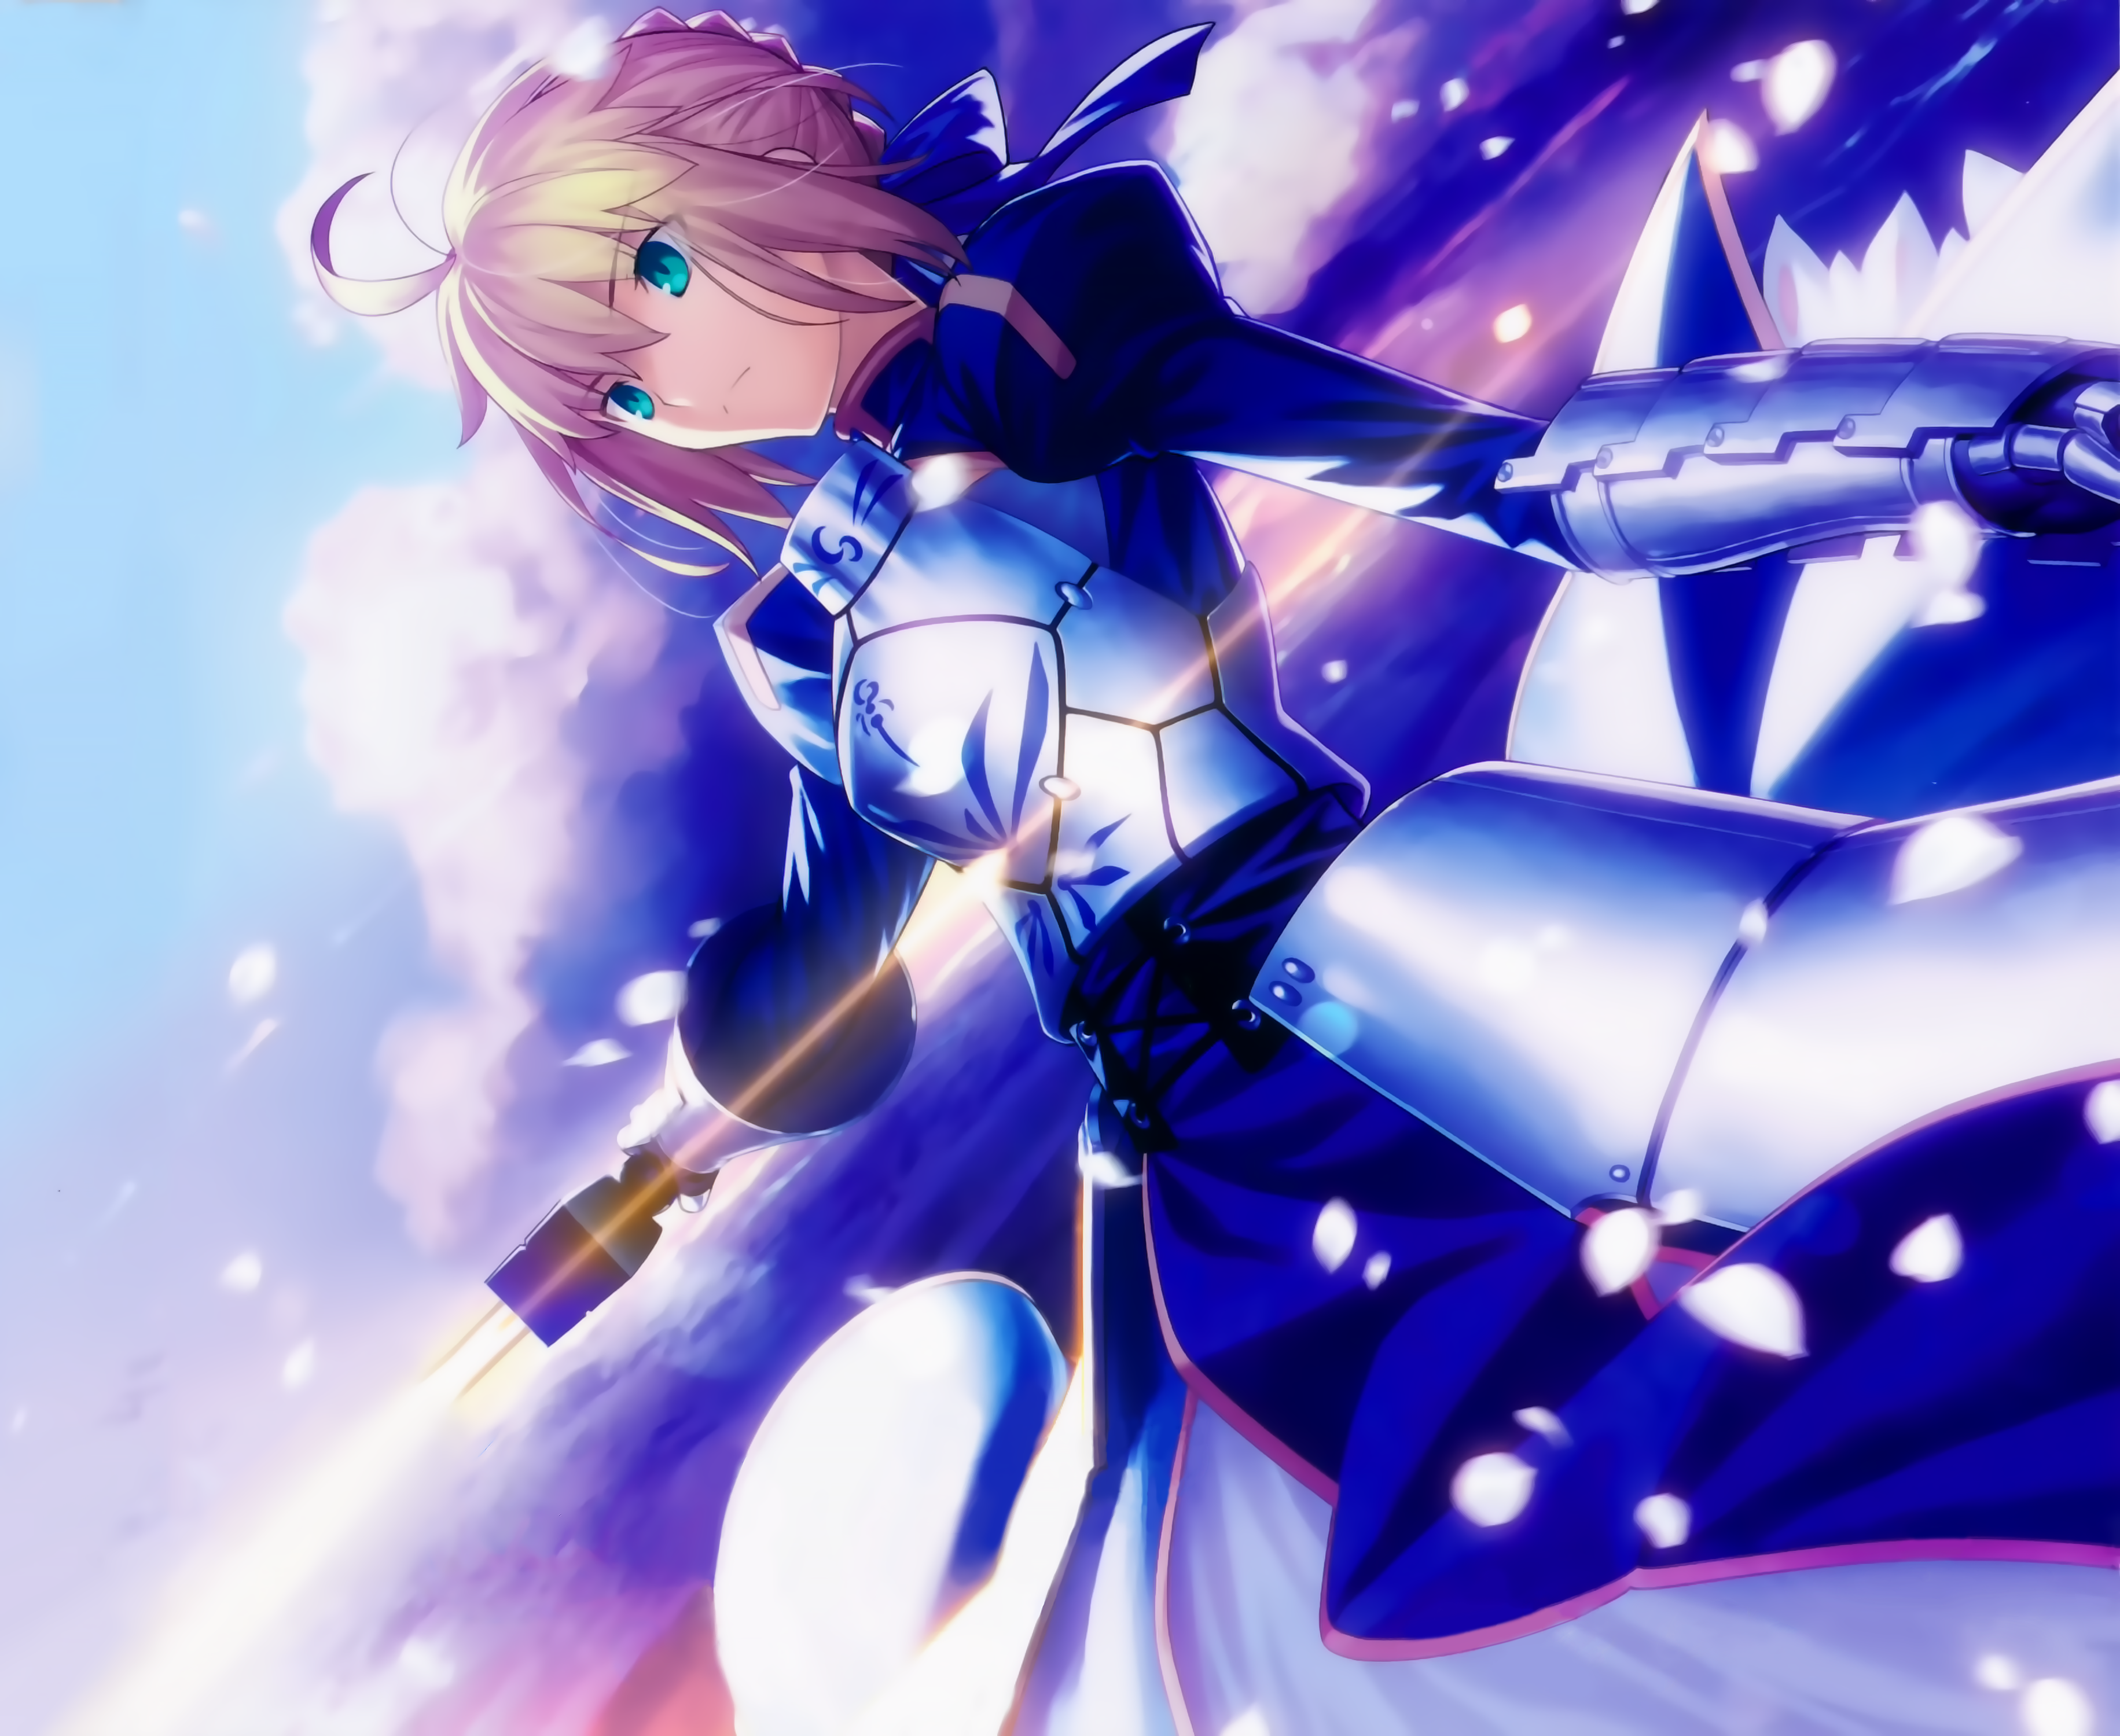 Download Saber (Fate Series) Anime Fate/Stay Night HD Wallpaper